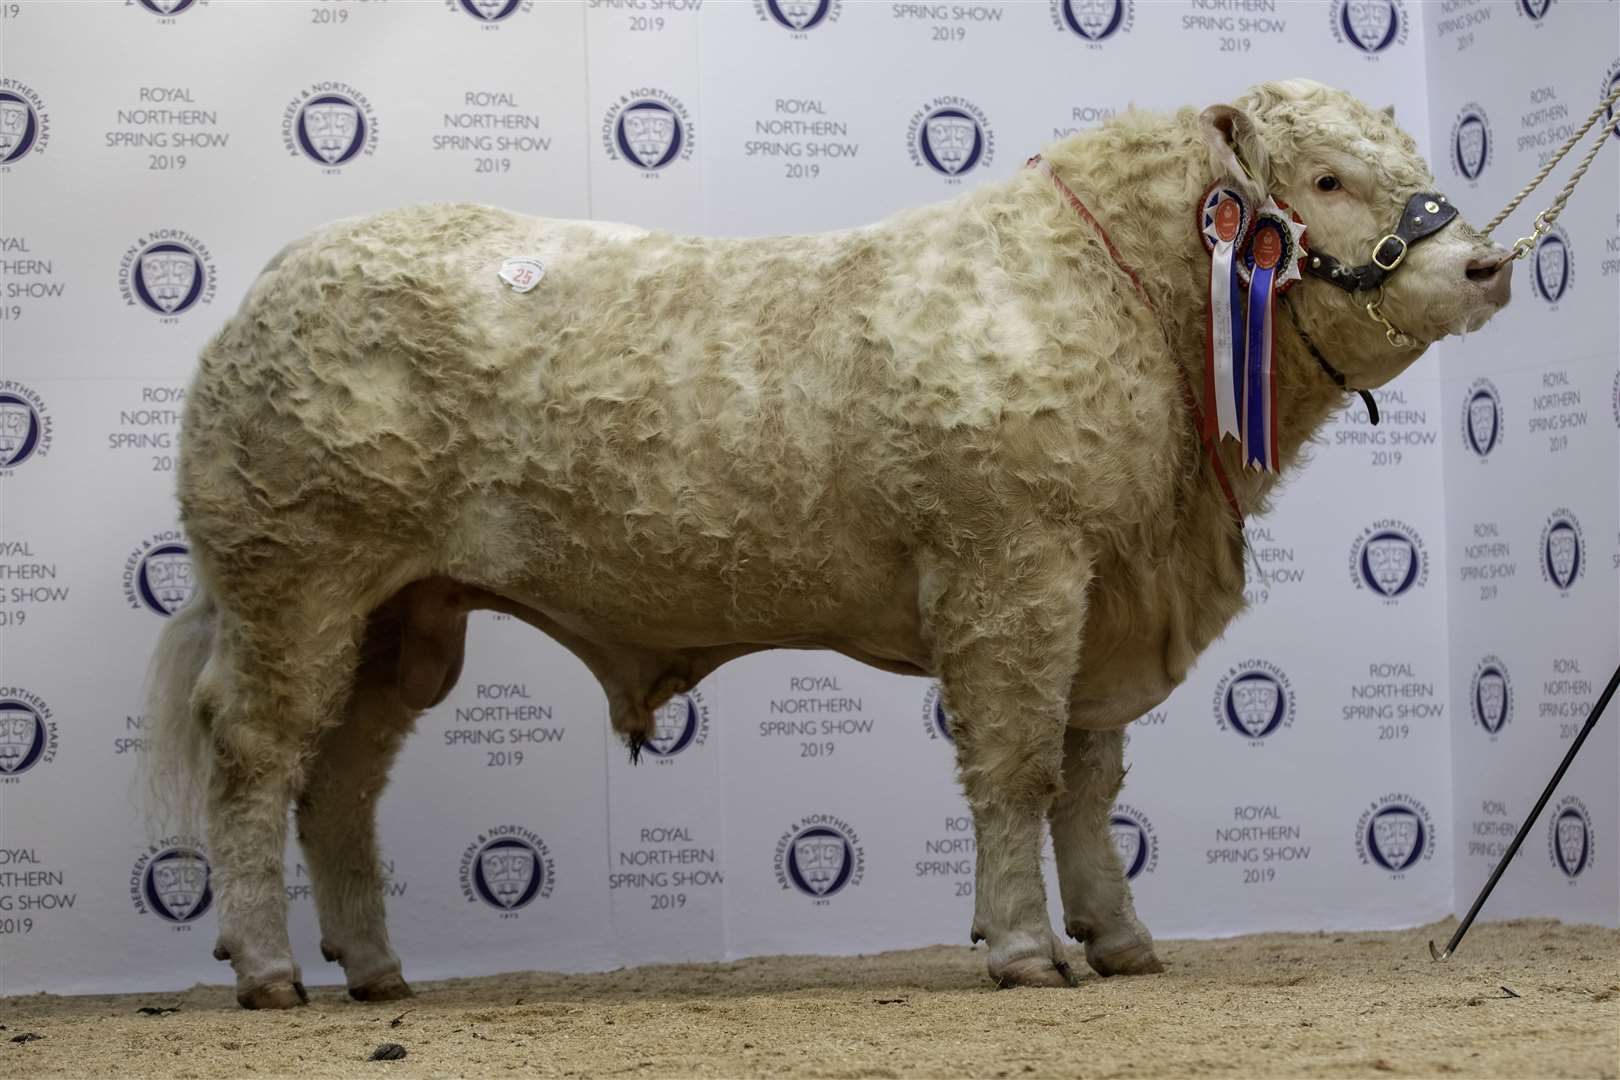 The overall Charolais champion which sold for the top price of 9500gns.